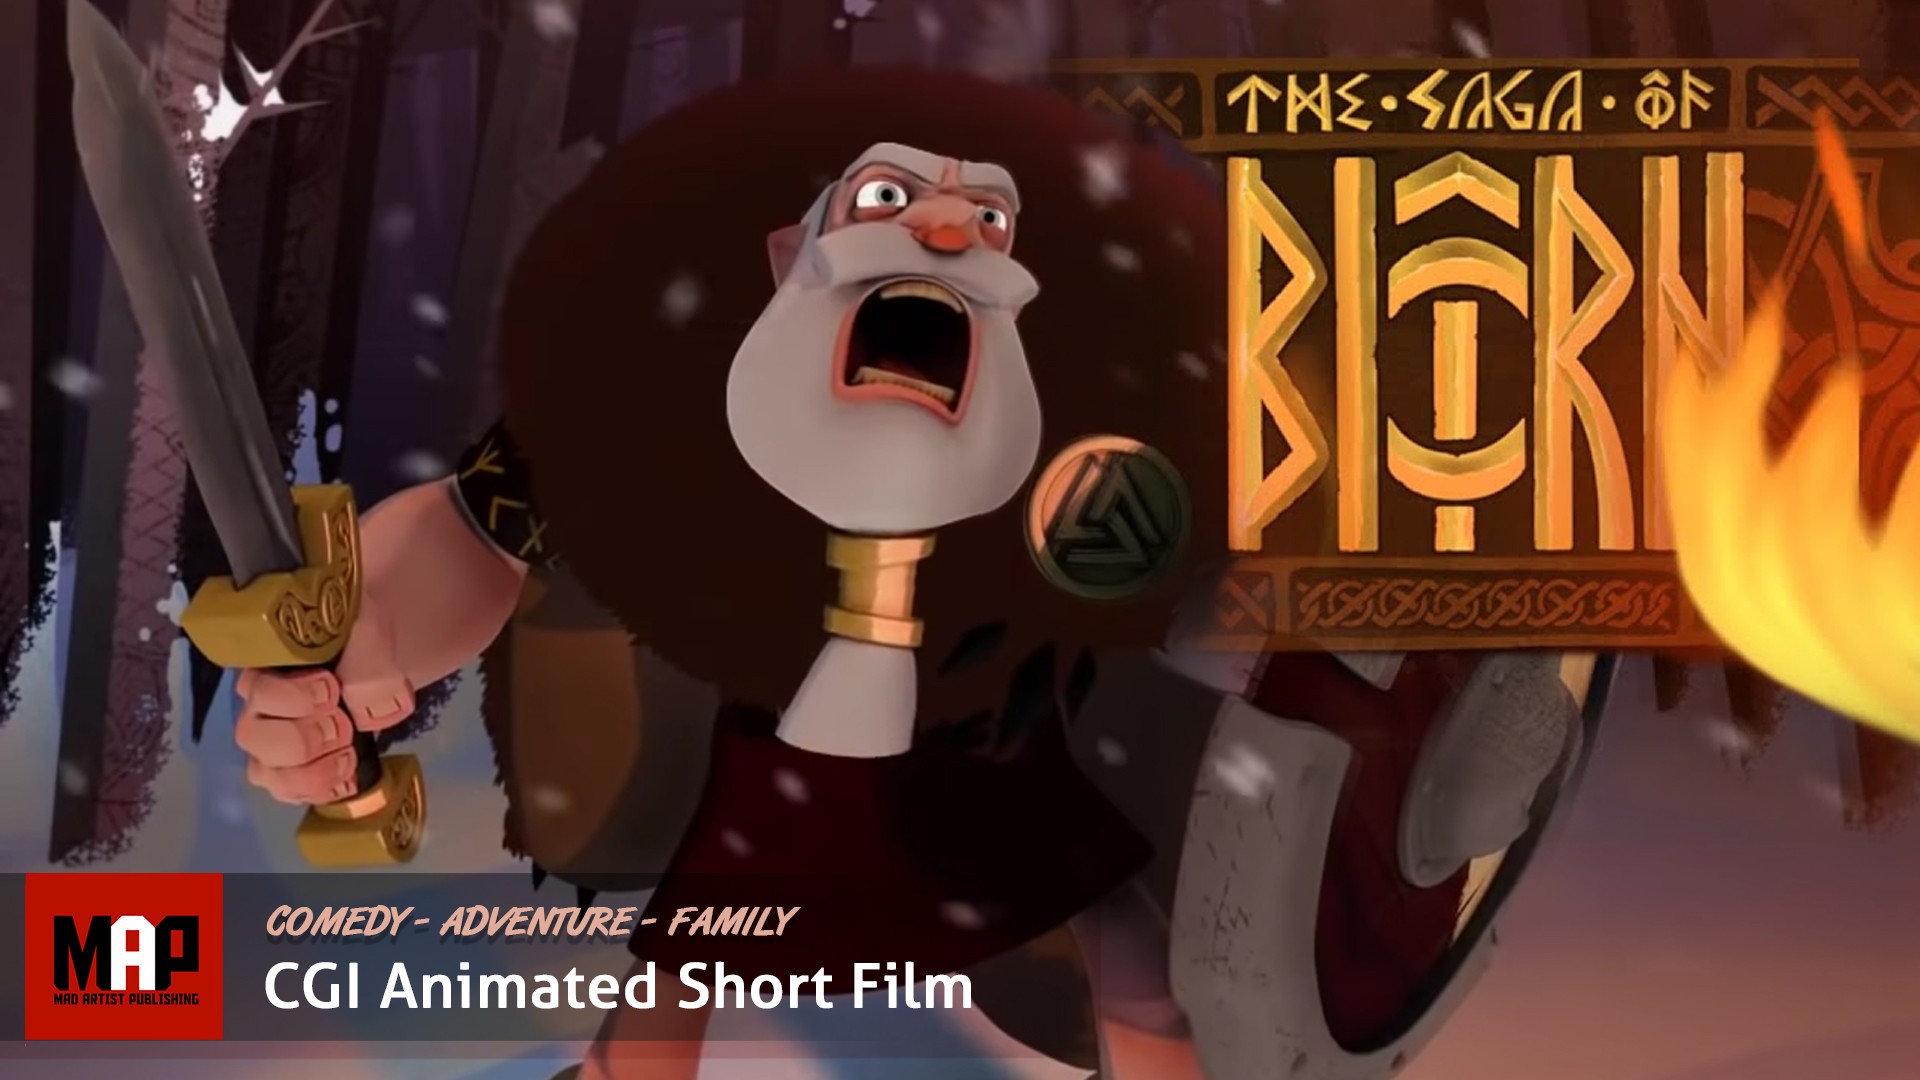 Check out Funny Short Films, Recommended Comedies and CGI Animated Short  Films | Mad Artist Publishing Ltd.